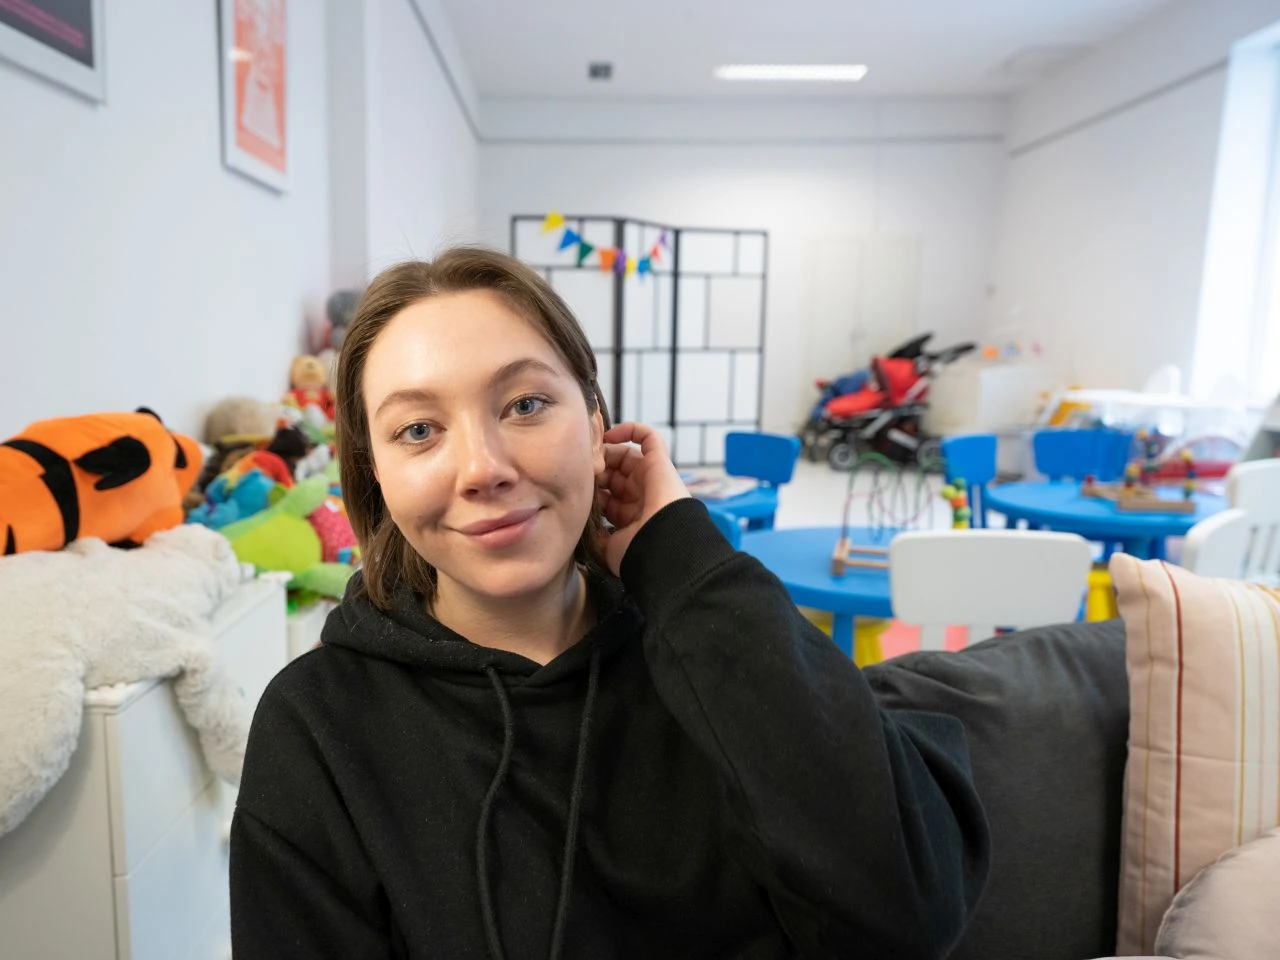 Rita, from Odessa, Ukraine, poses for a photo at the Jewish Community Center with toys in the background in Krakow, Poland